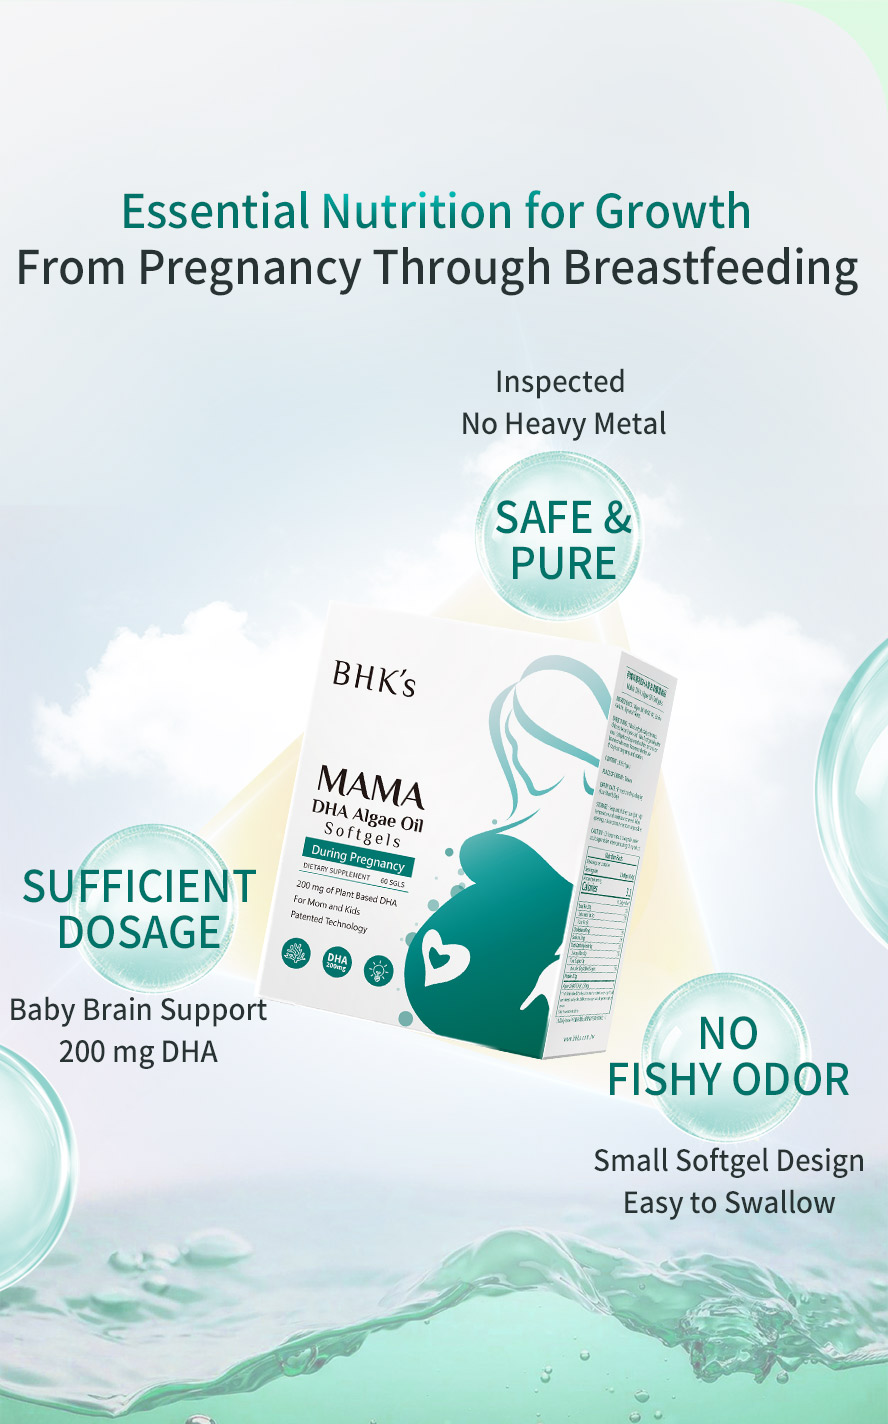 BHK's DHA Algae Oil is formulated for pregnancy DHA supply